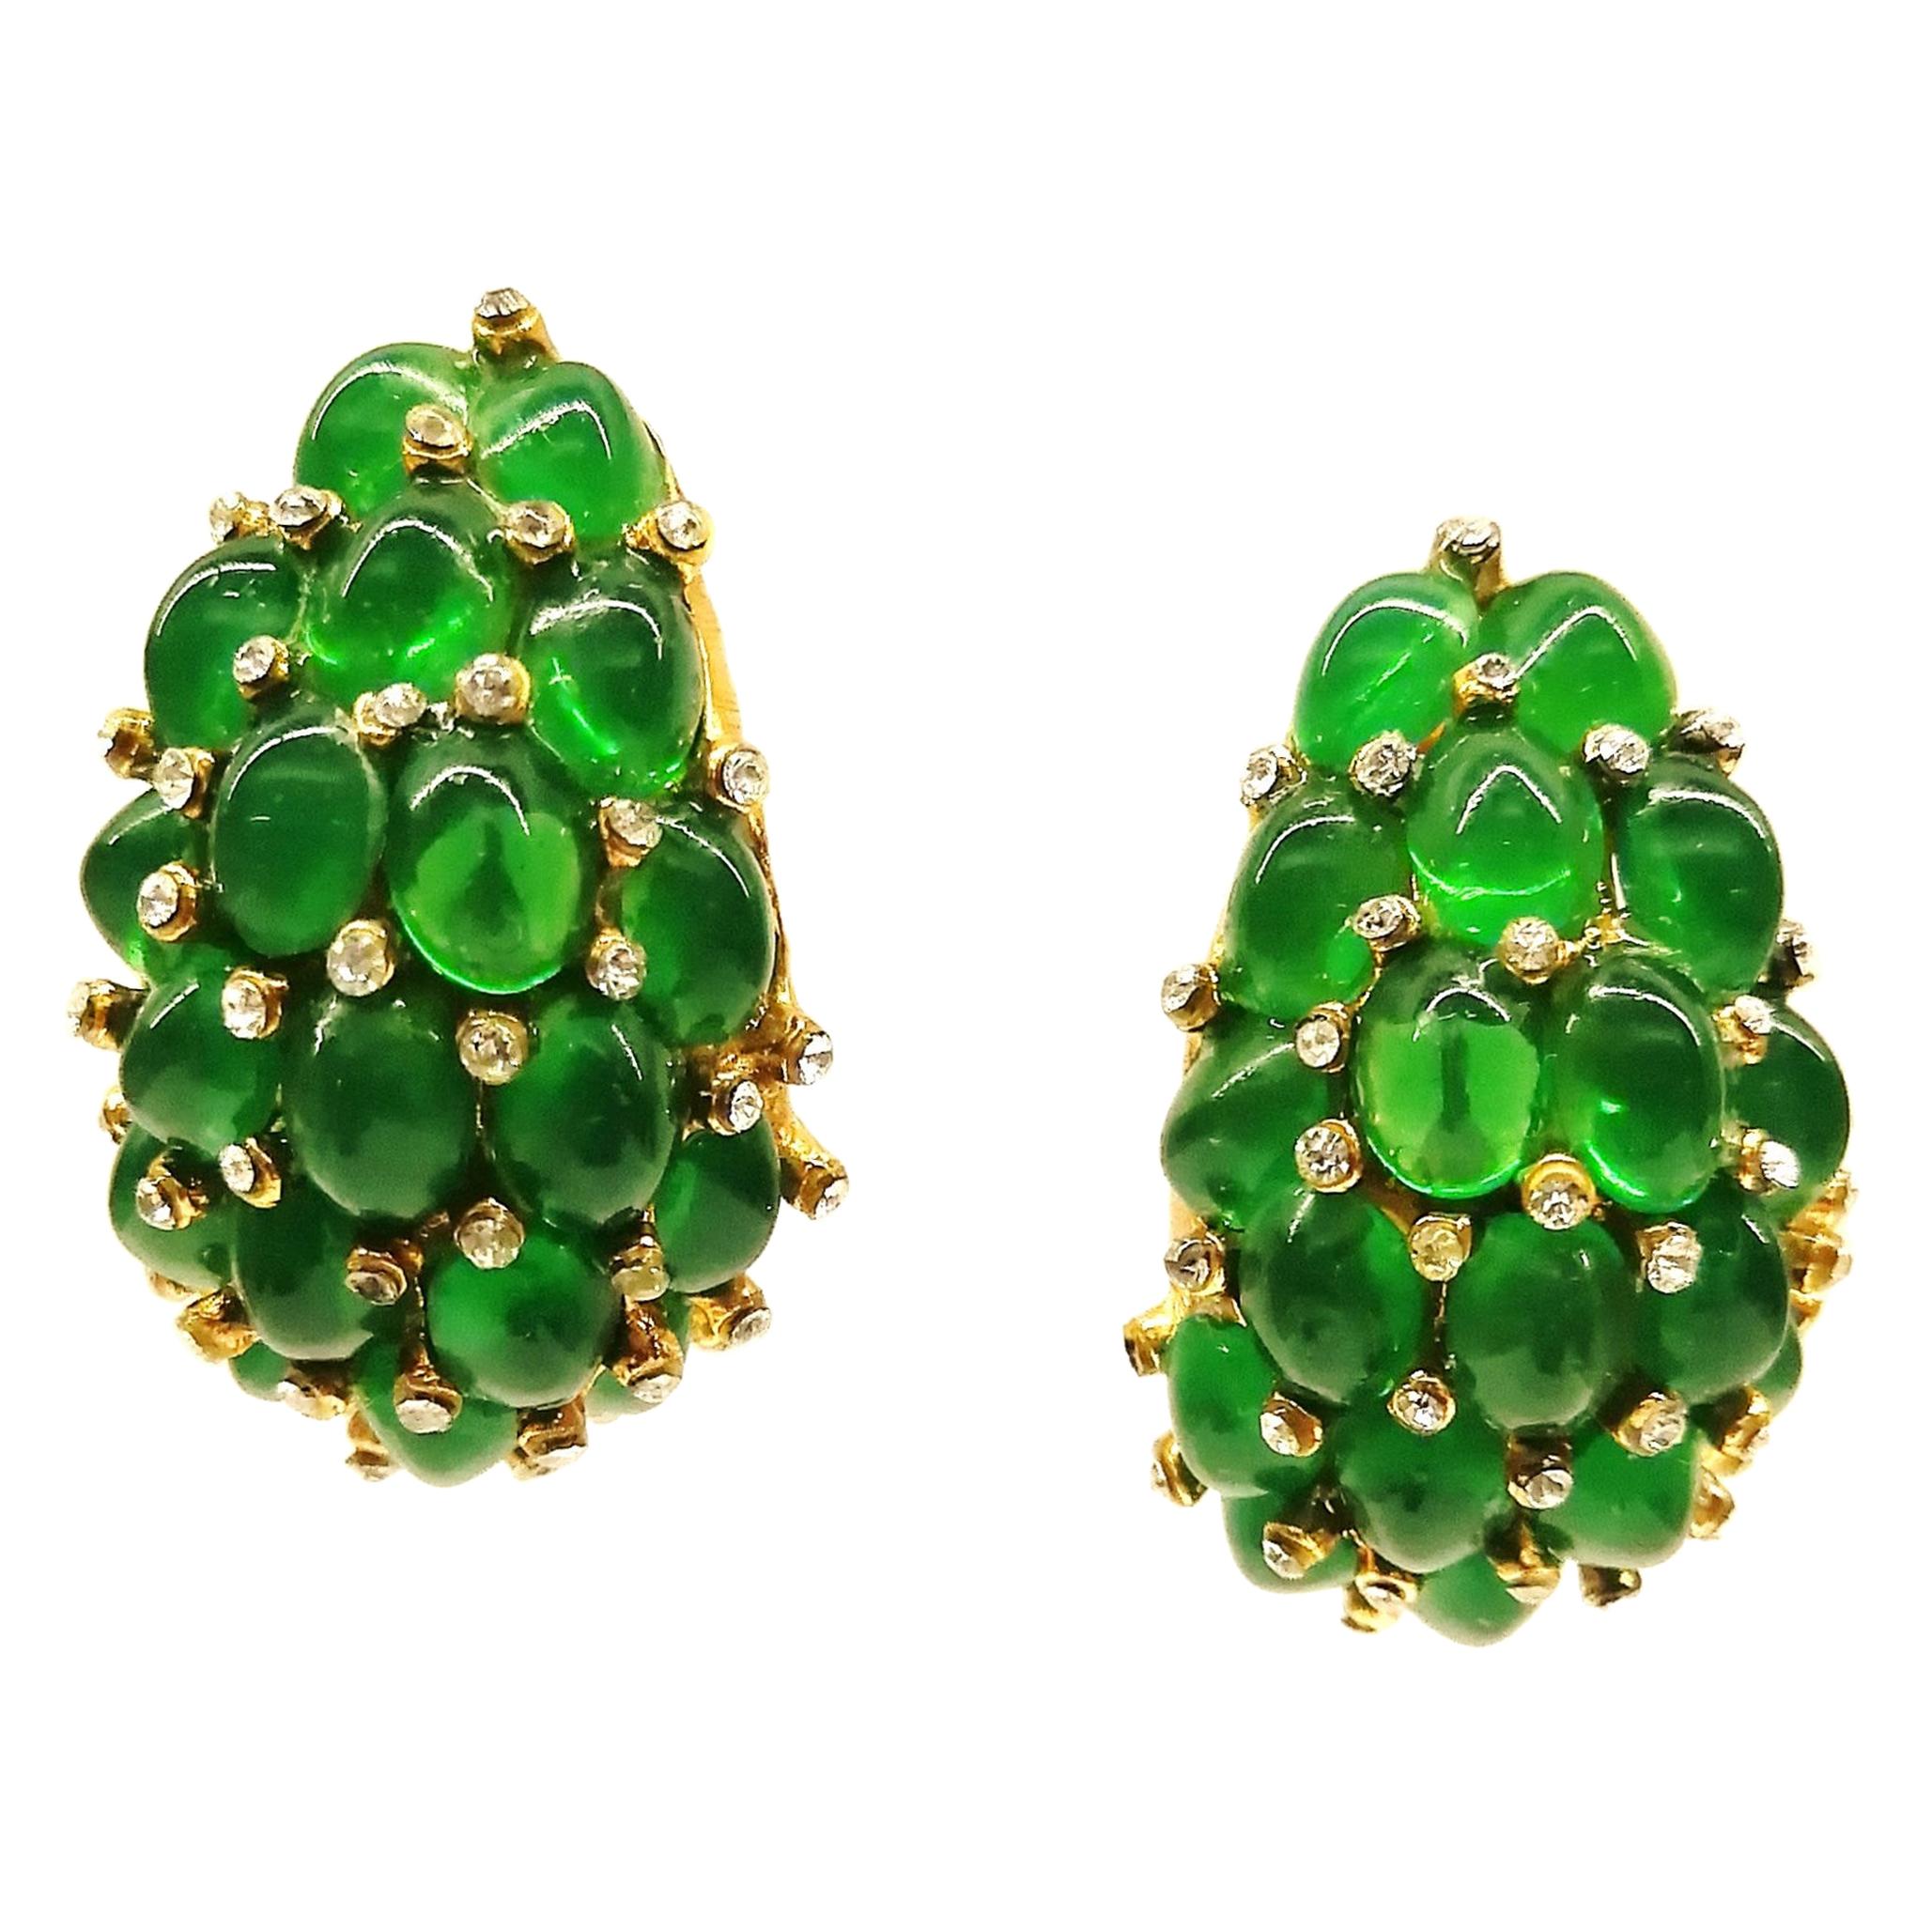 Emerald glass cabuchon and clear paste 'cluster' earrings, Marcel Boucher, 1960s